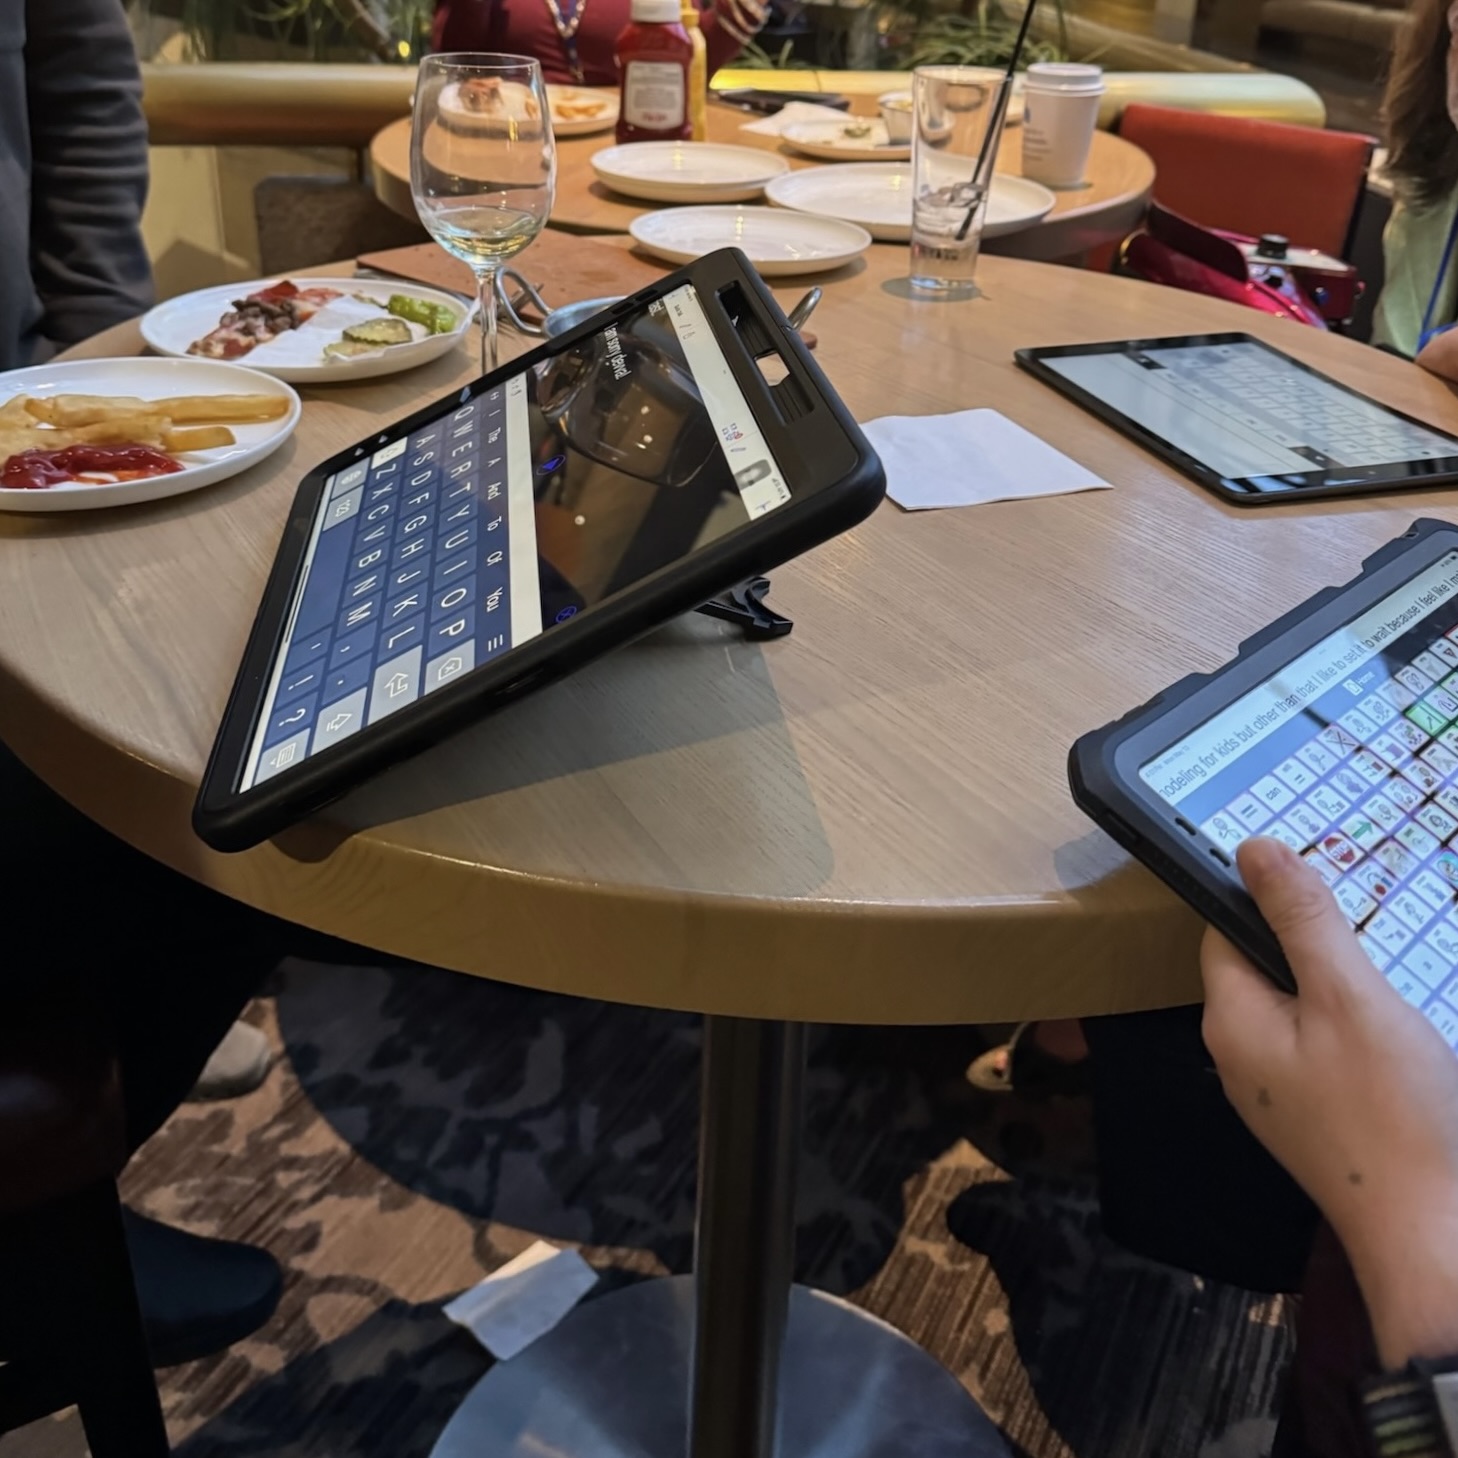 Three different speech generating devices are on a round table among drinking glasses and dinner plates. An AAC user's hand is in view as they type on one of the devices.